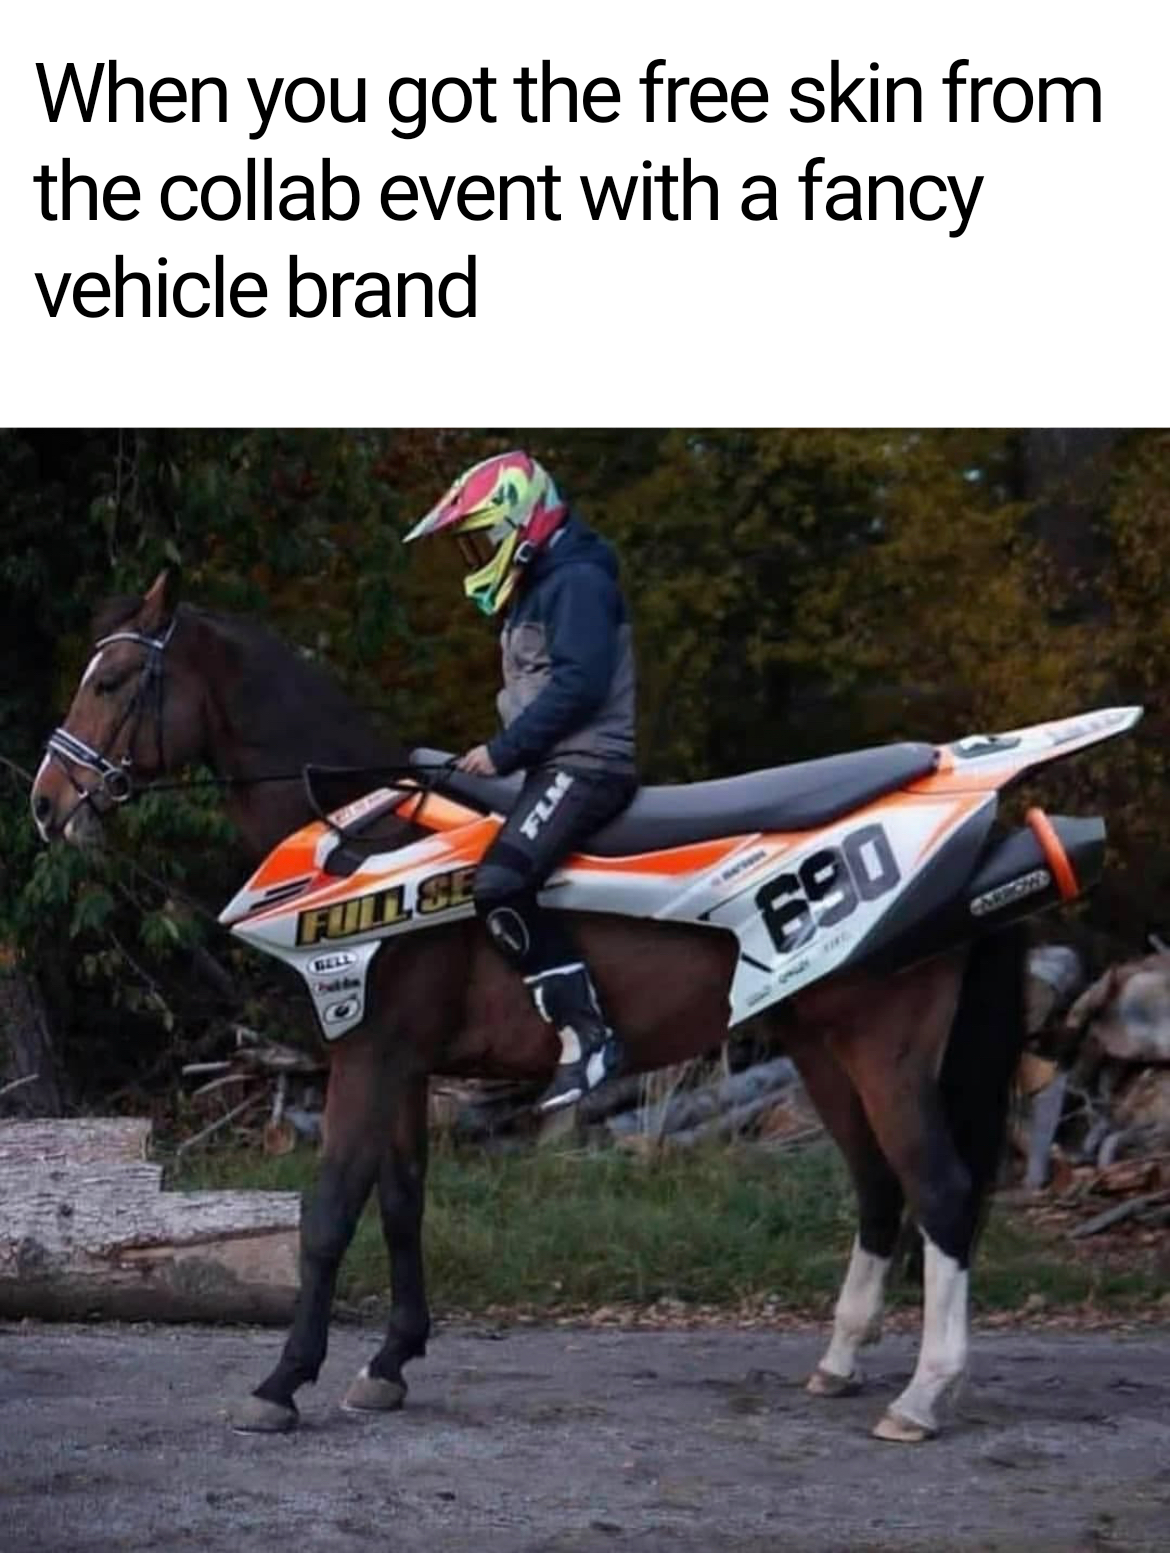 dank memes - motocross horse - When you got the free skin from the collab event with a fancy vehicle brand Filte 690